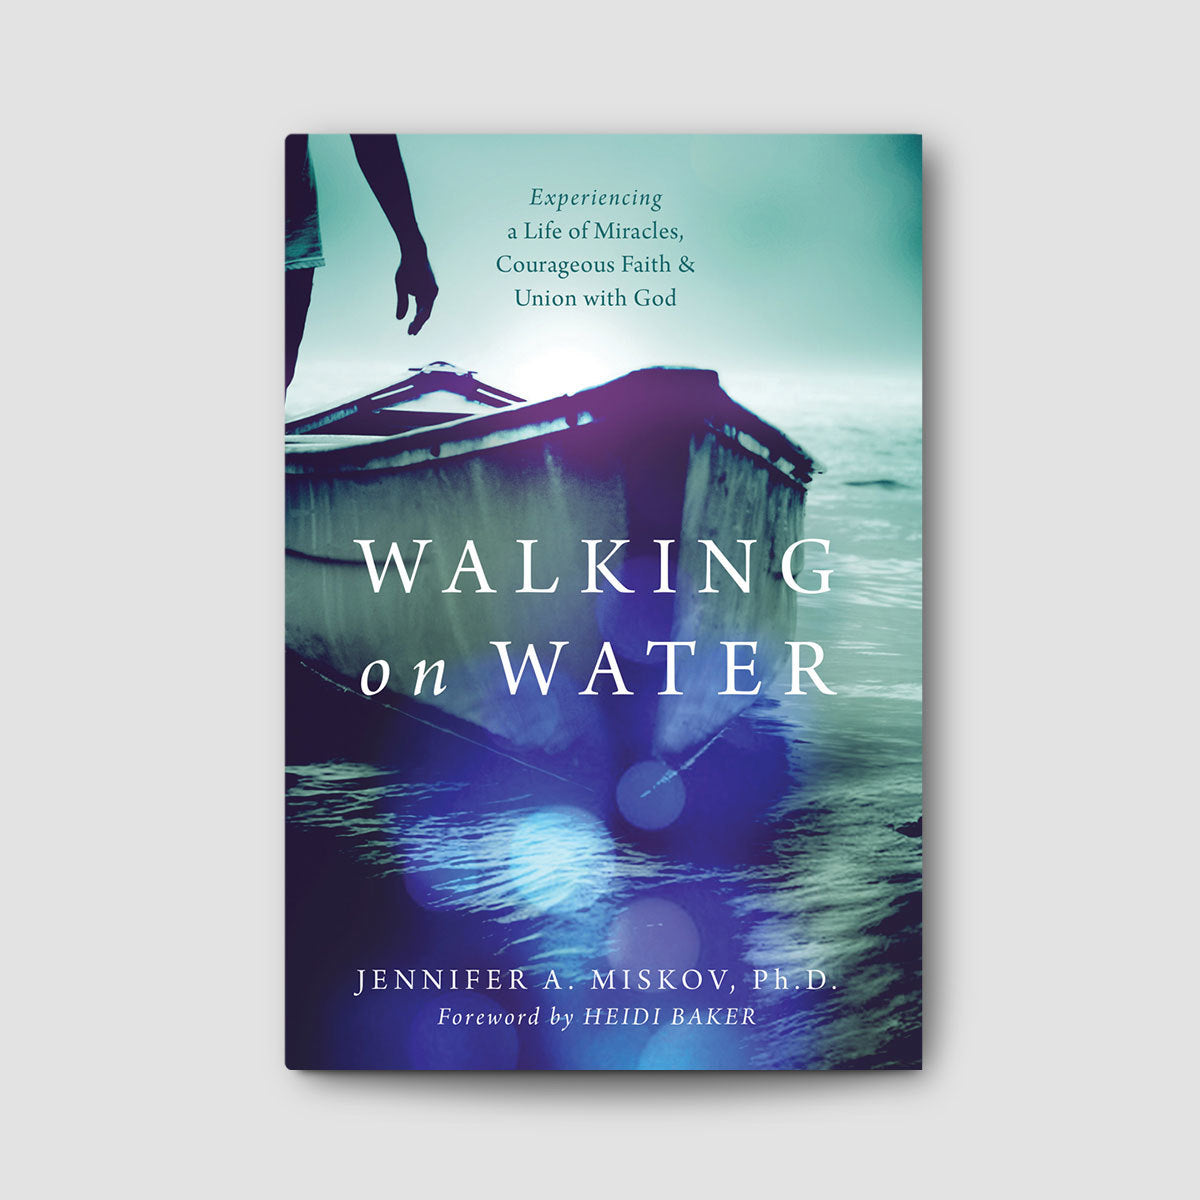 Walking on Water: Experiencing a Life Miracles, Courageous Faith and Union with God